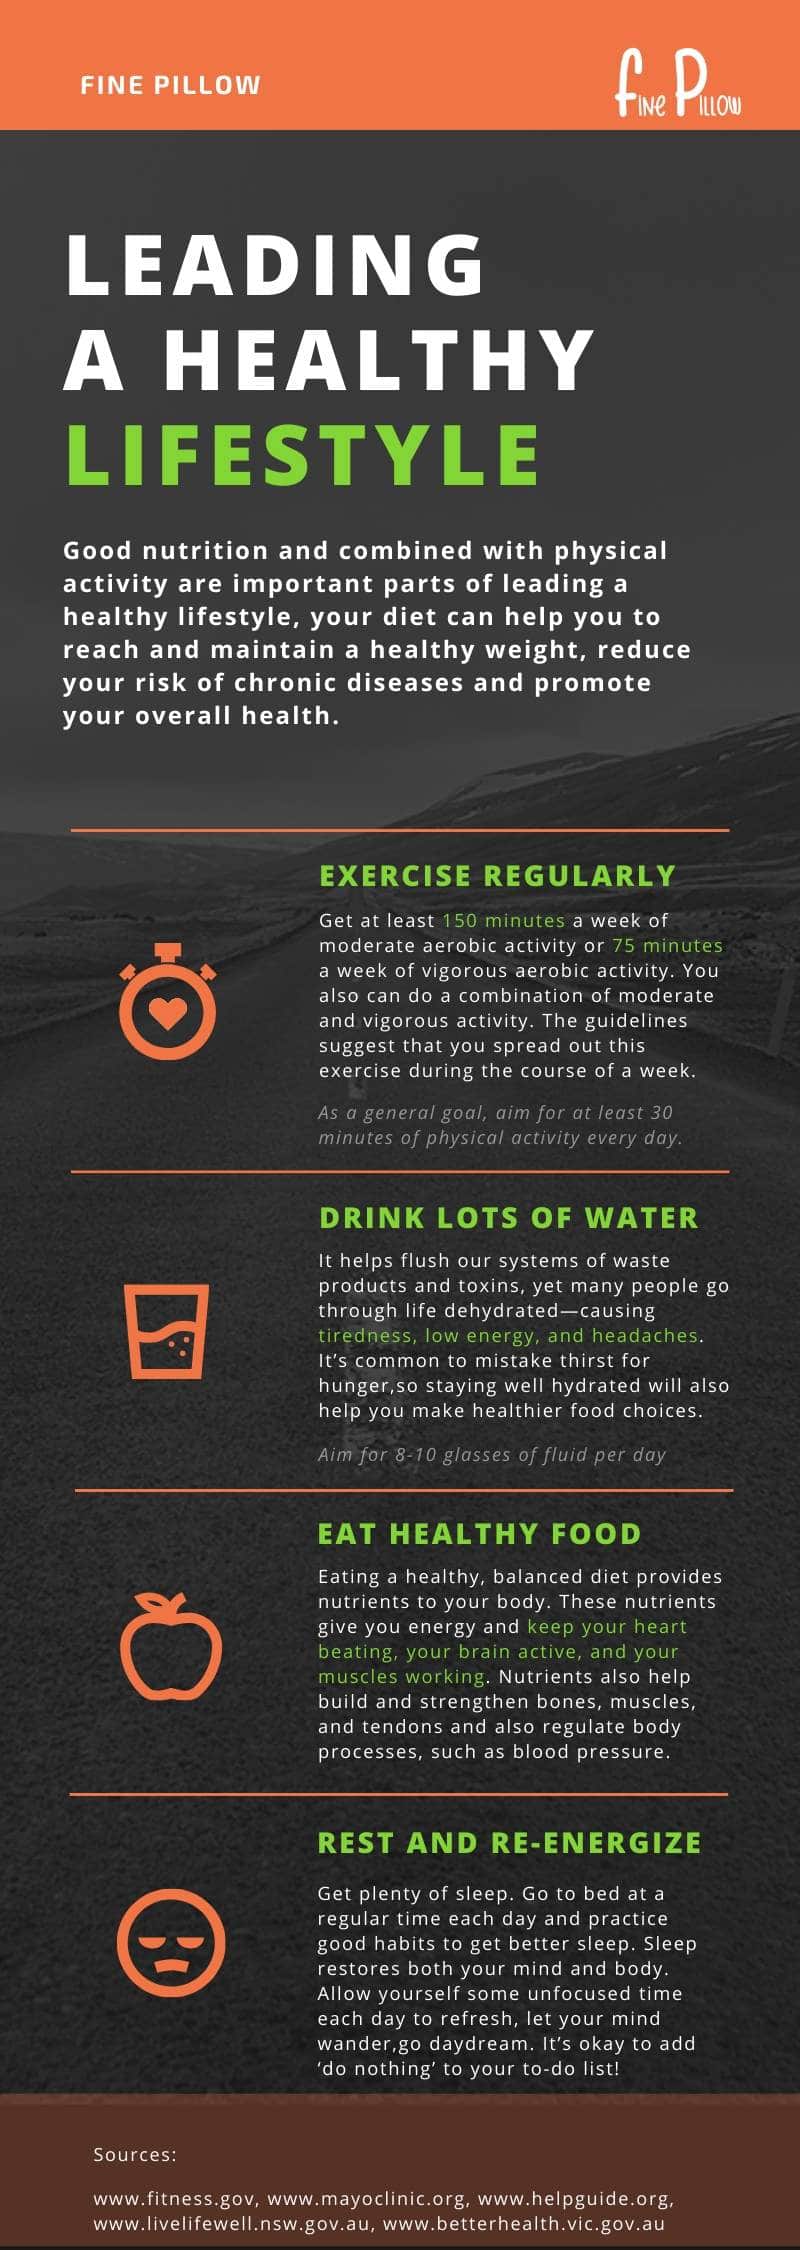 7 Wellness Tips For A Healthy Lifestyle